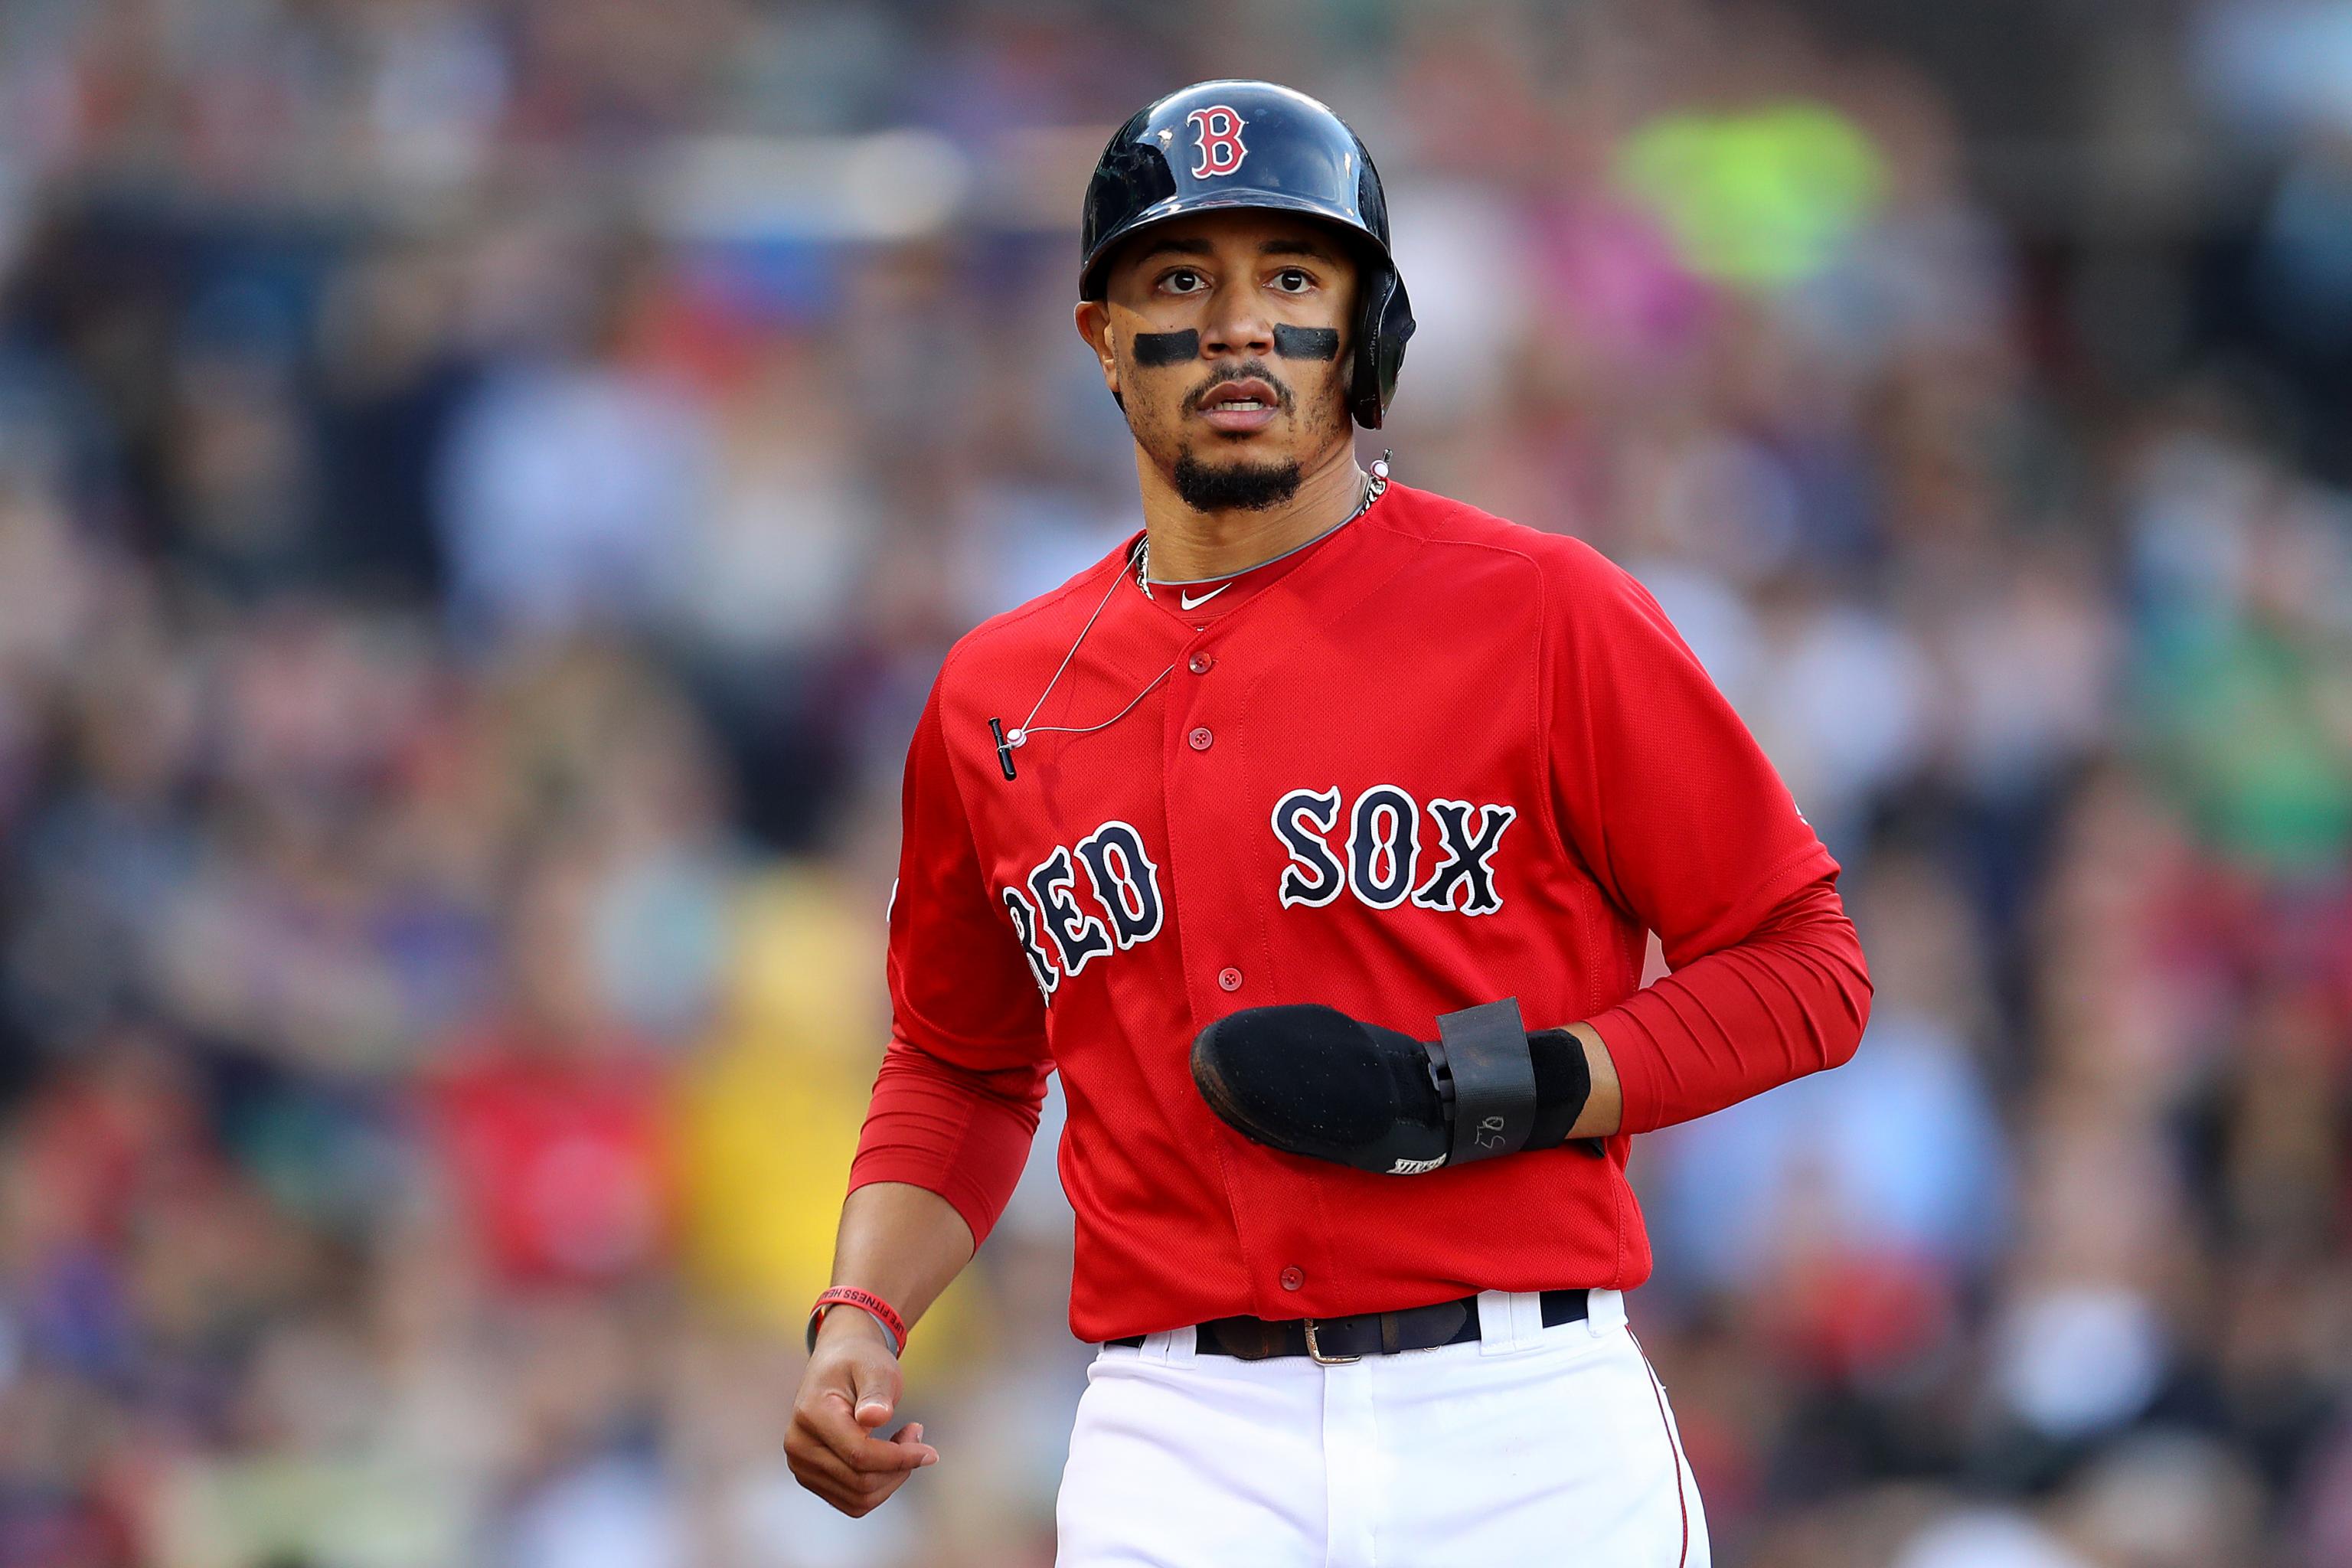 Pros and cons of Betts trade for Padres